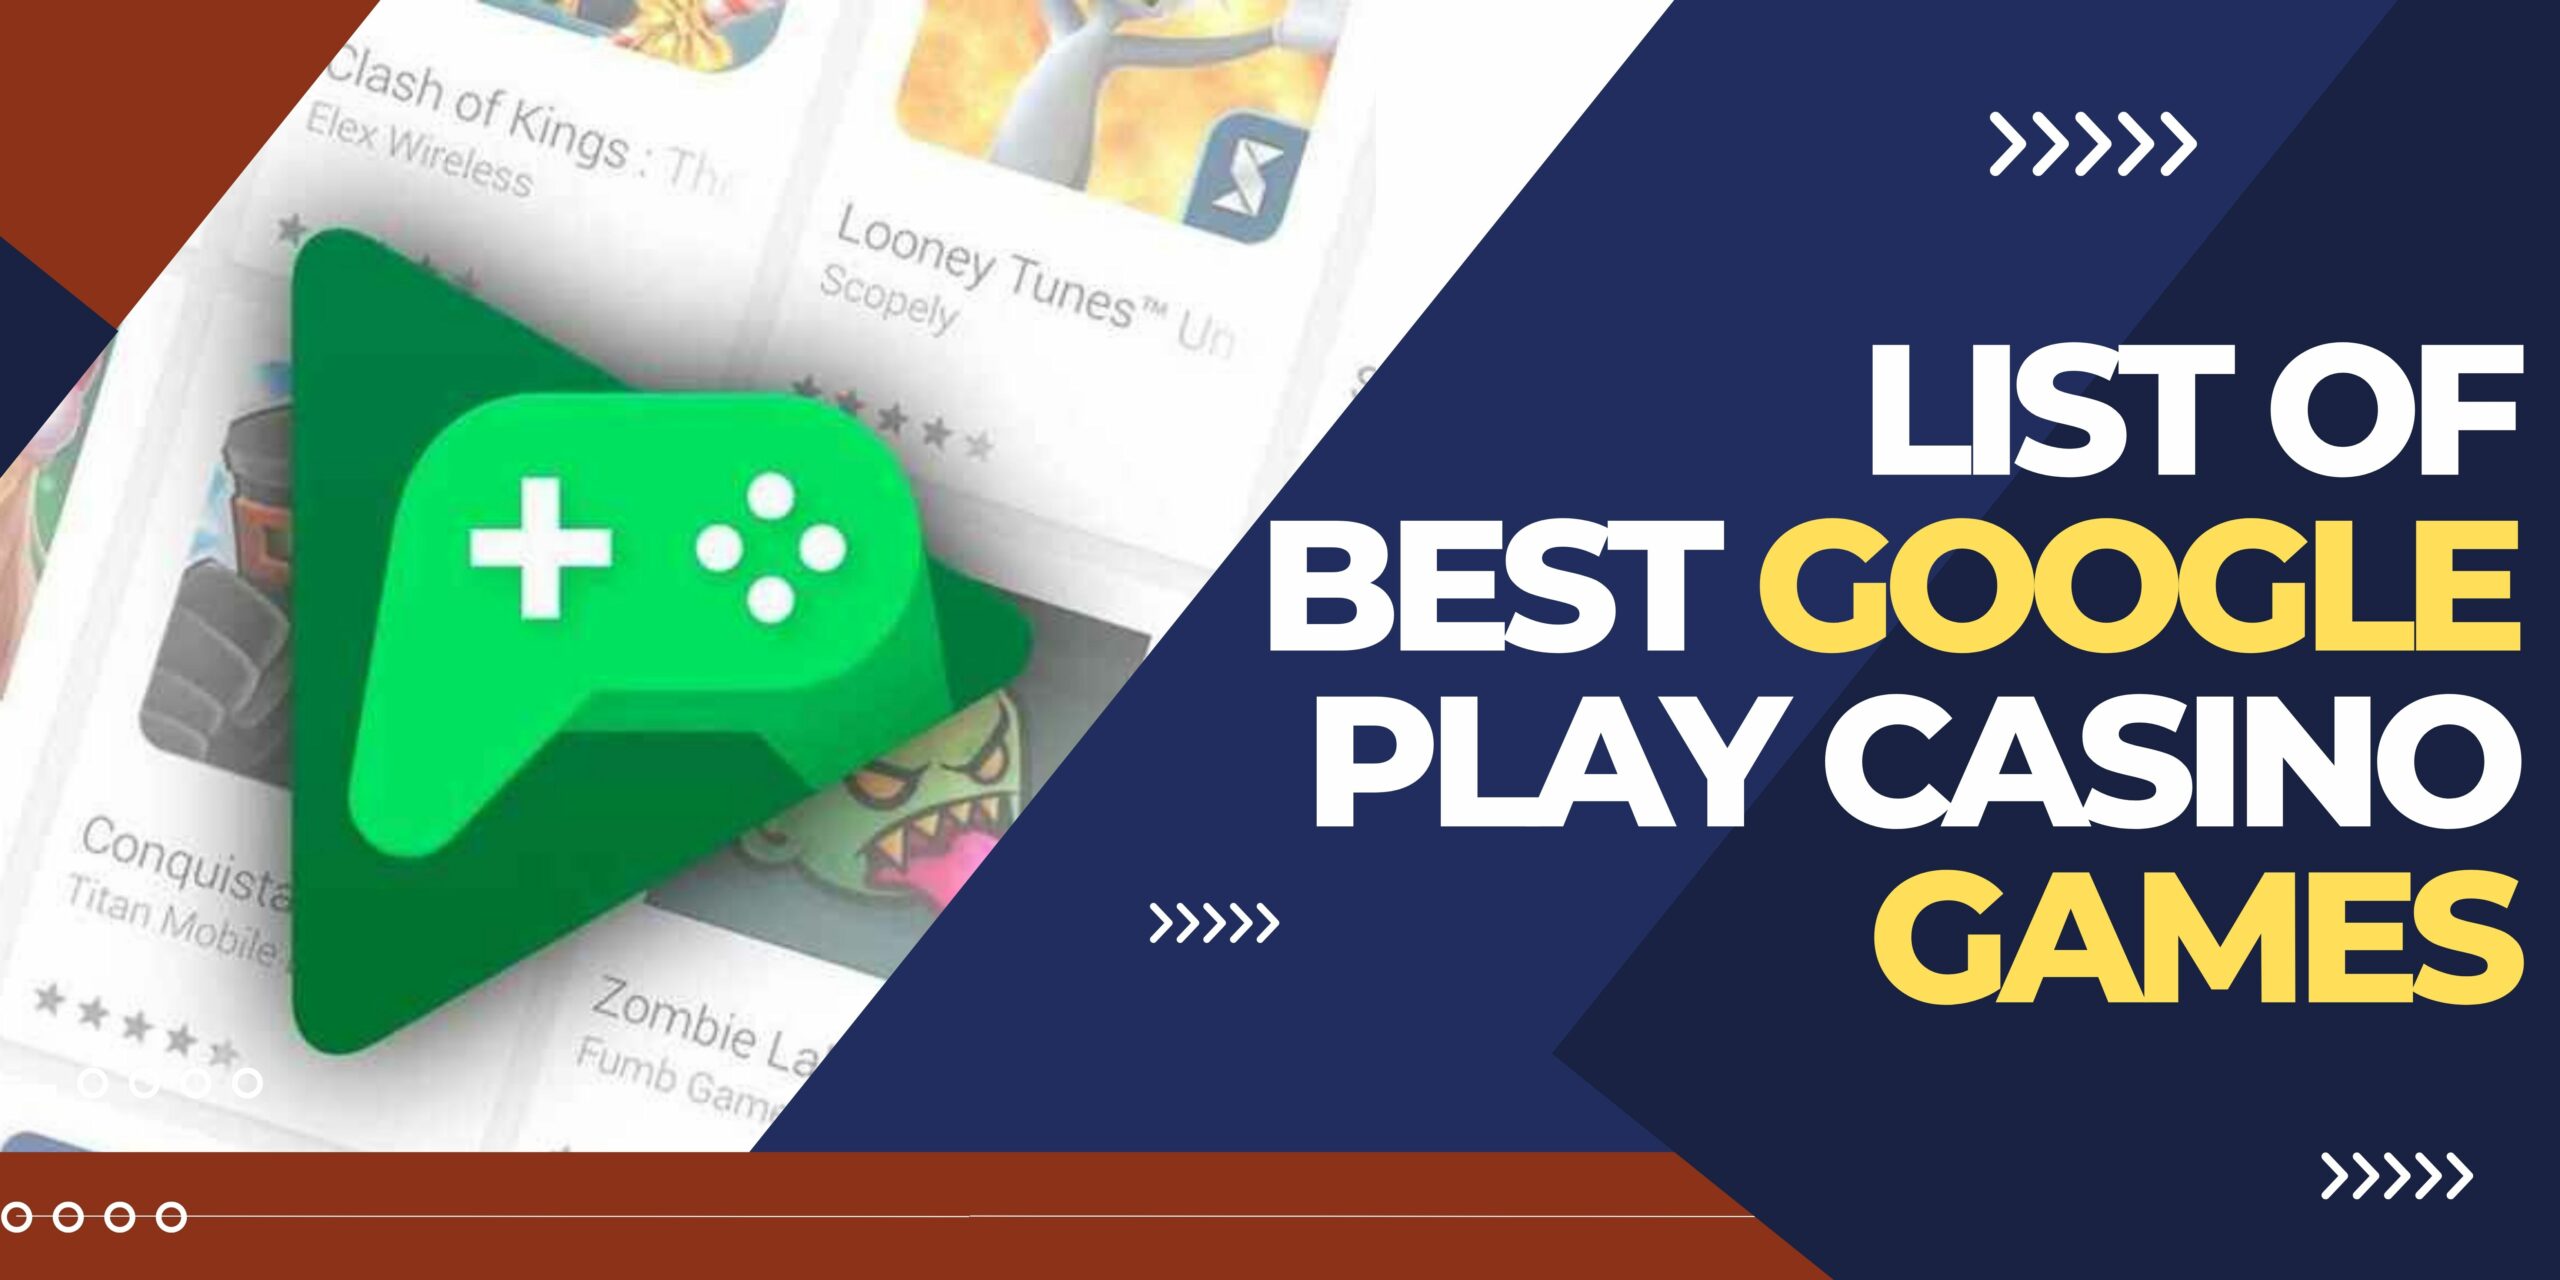 an image of List of Best Google Play Casino Games